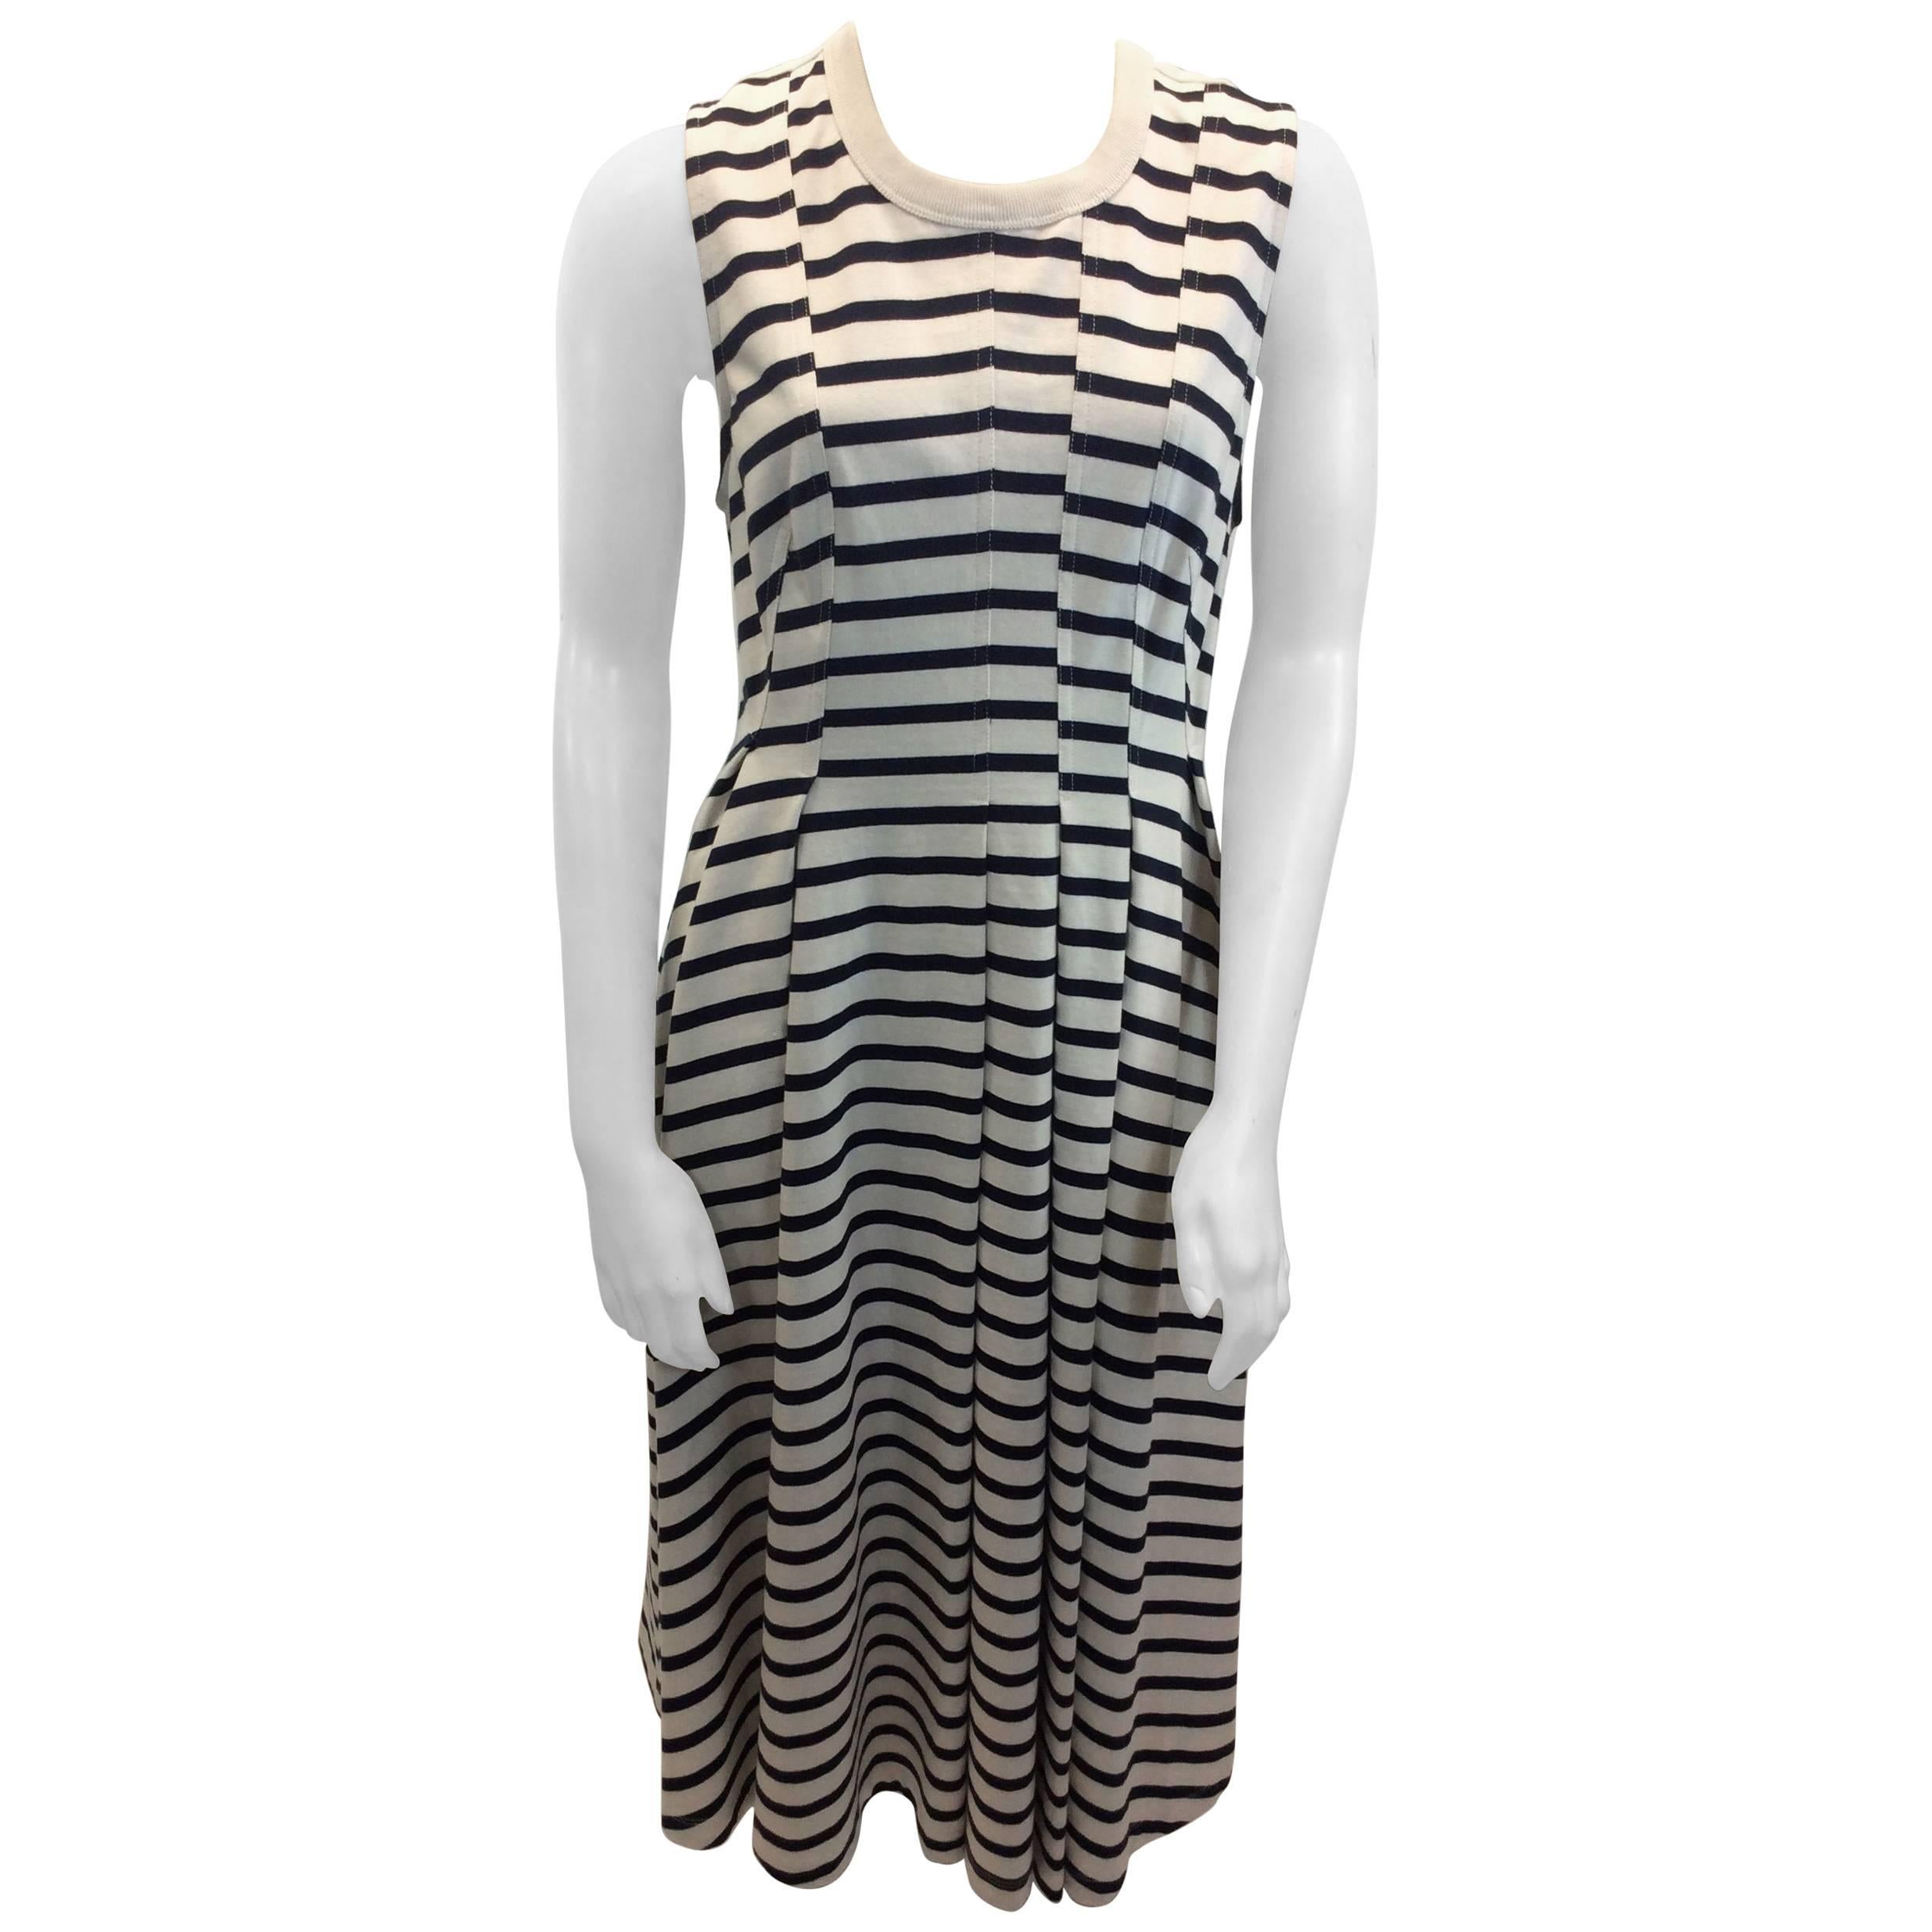 Alexander Wang Navy Blue and White Stripe Dress NWT For Sale